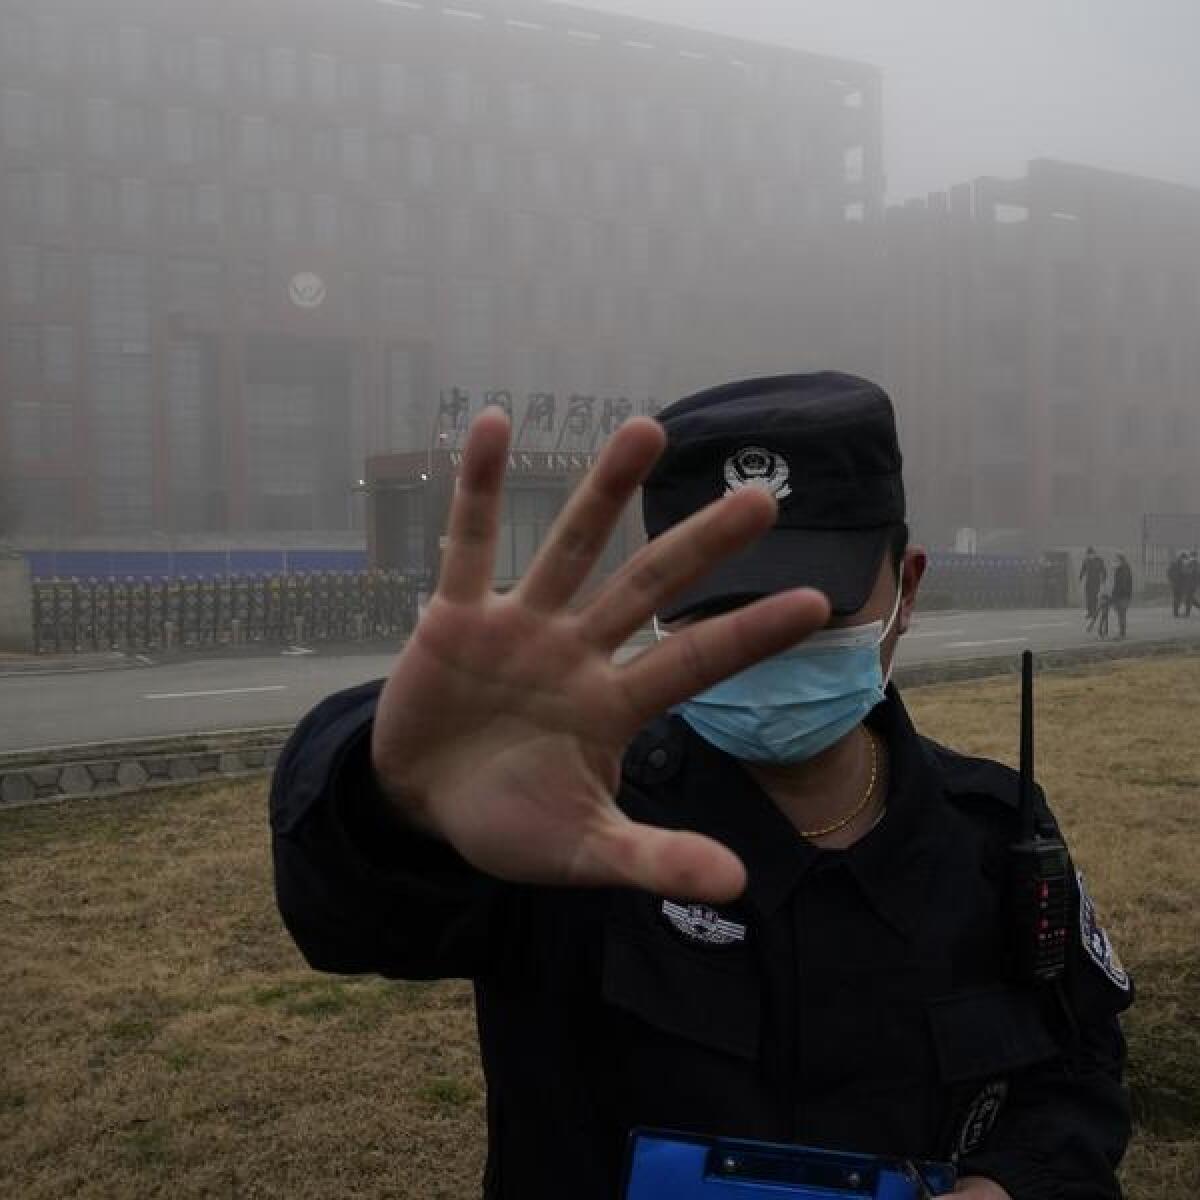 A security official in China